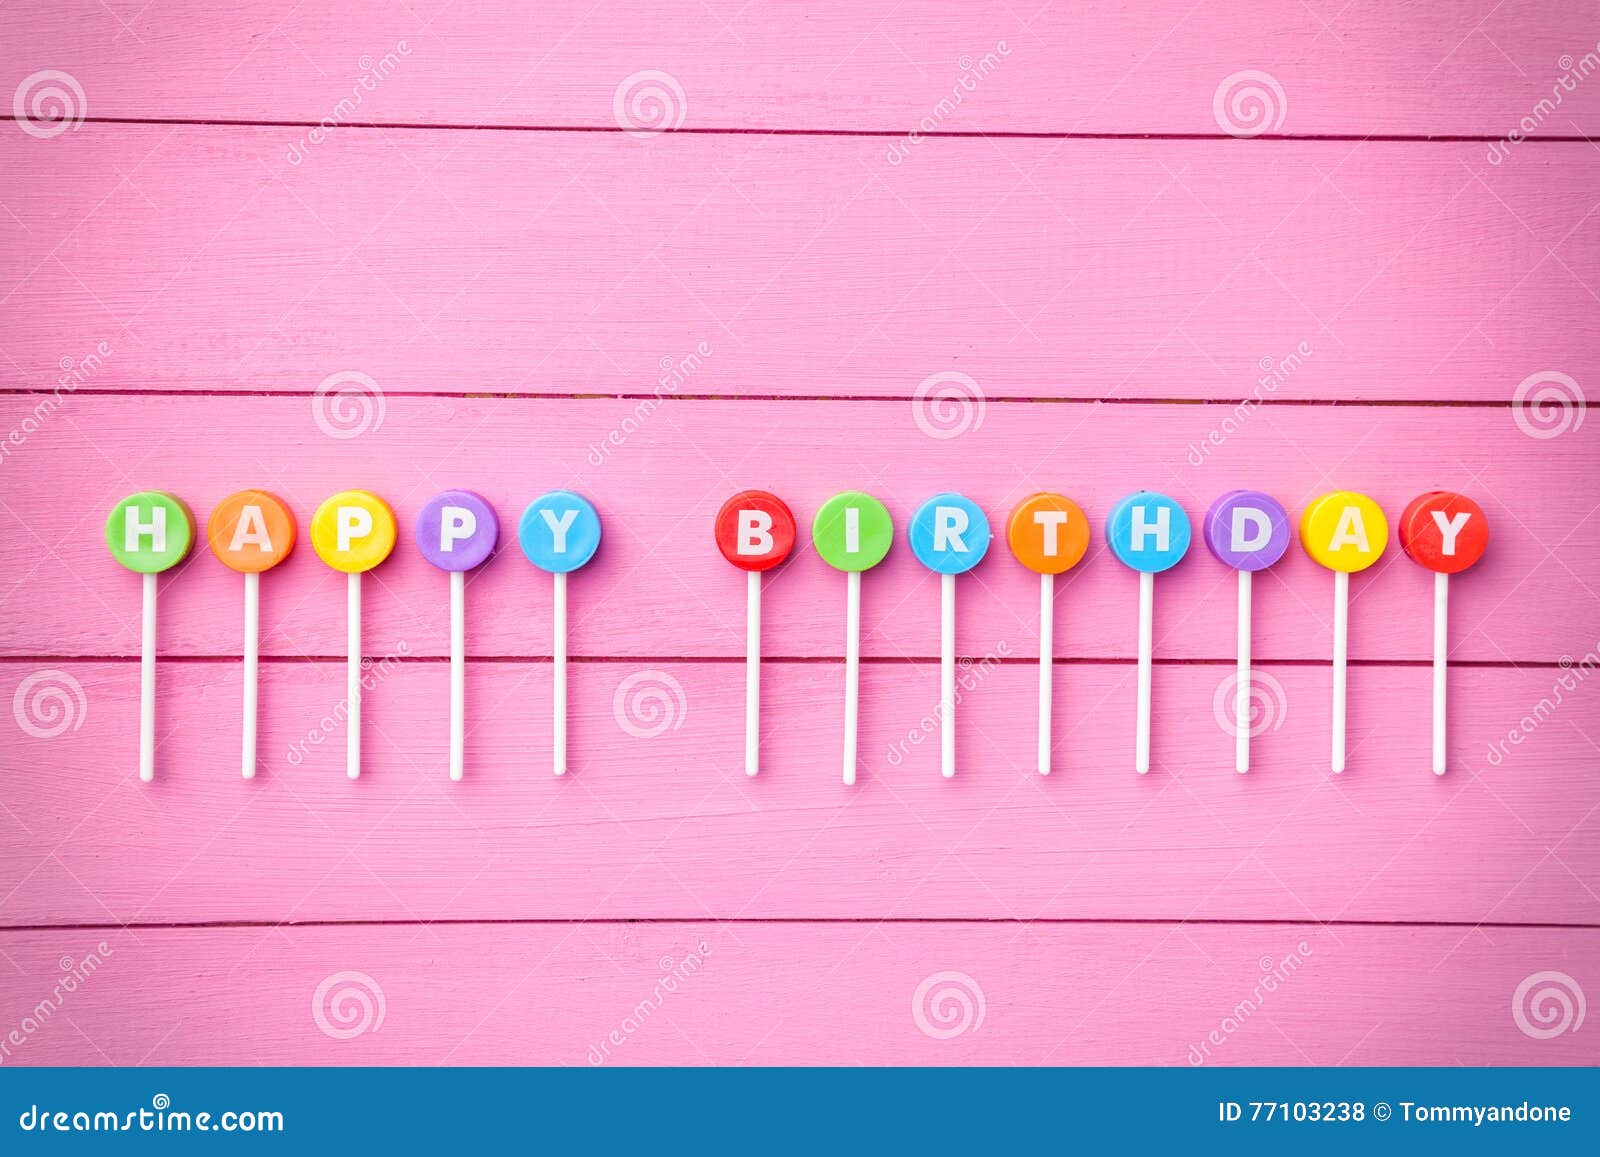 Colorful Happy Birthday Background Stock Photo - Image of decorated ...